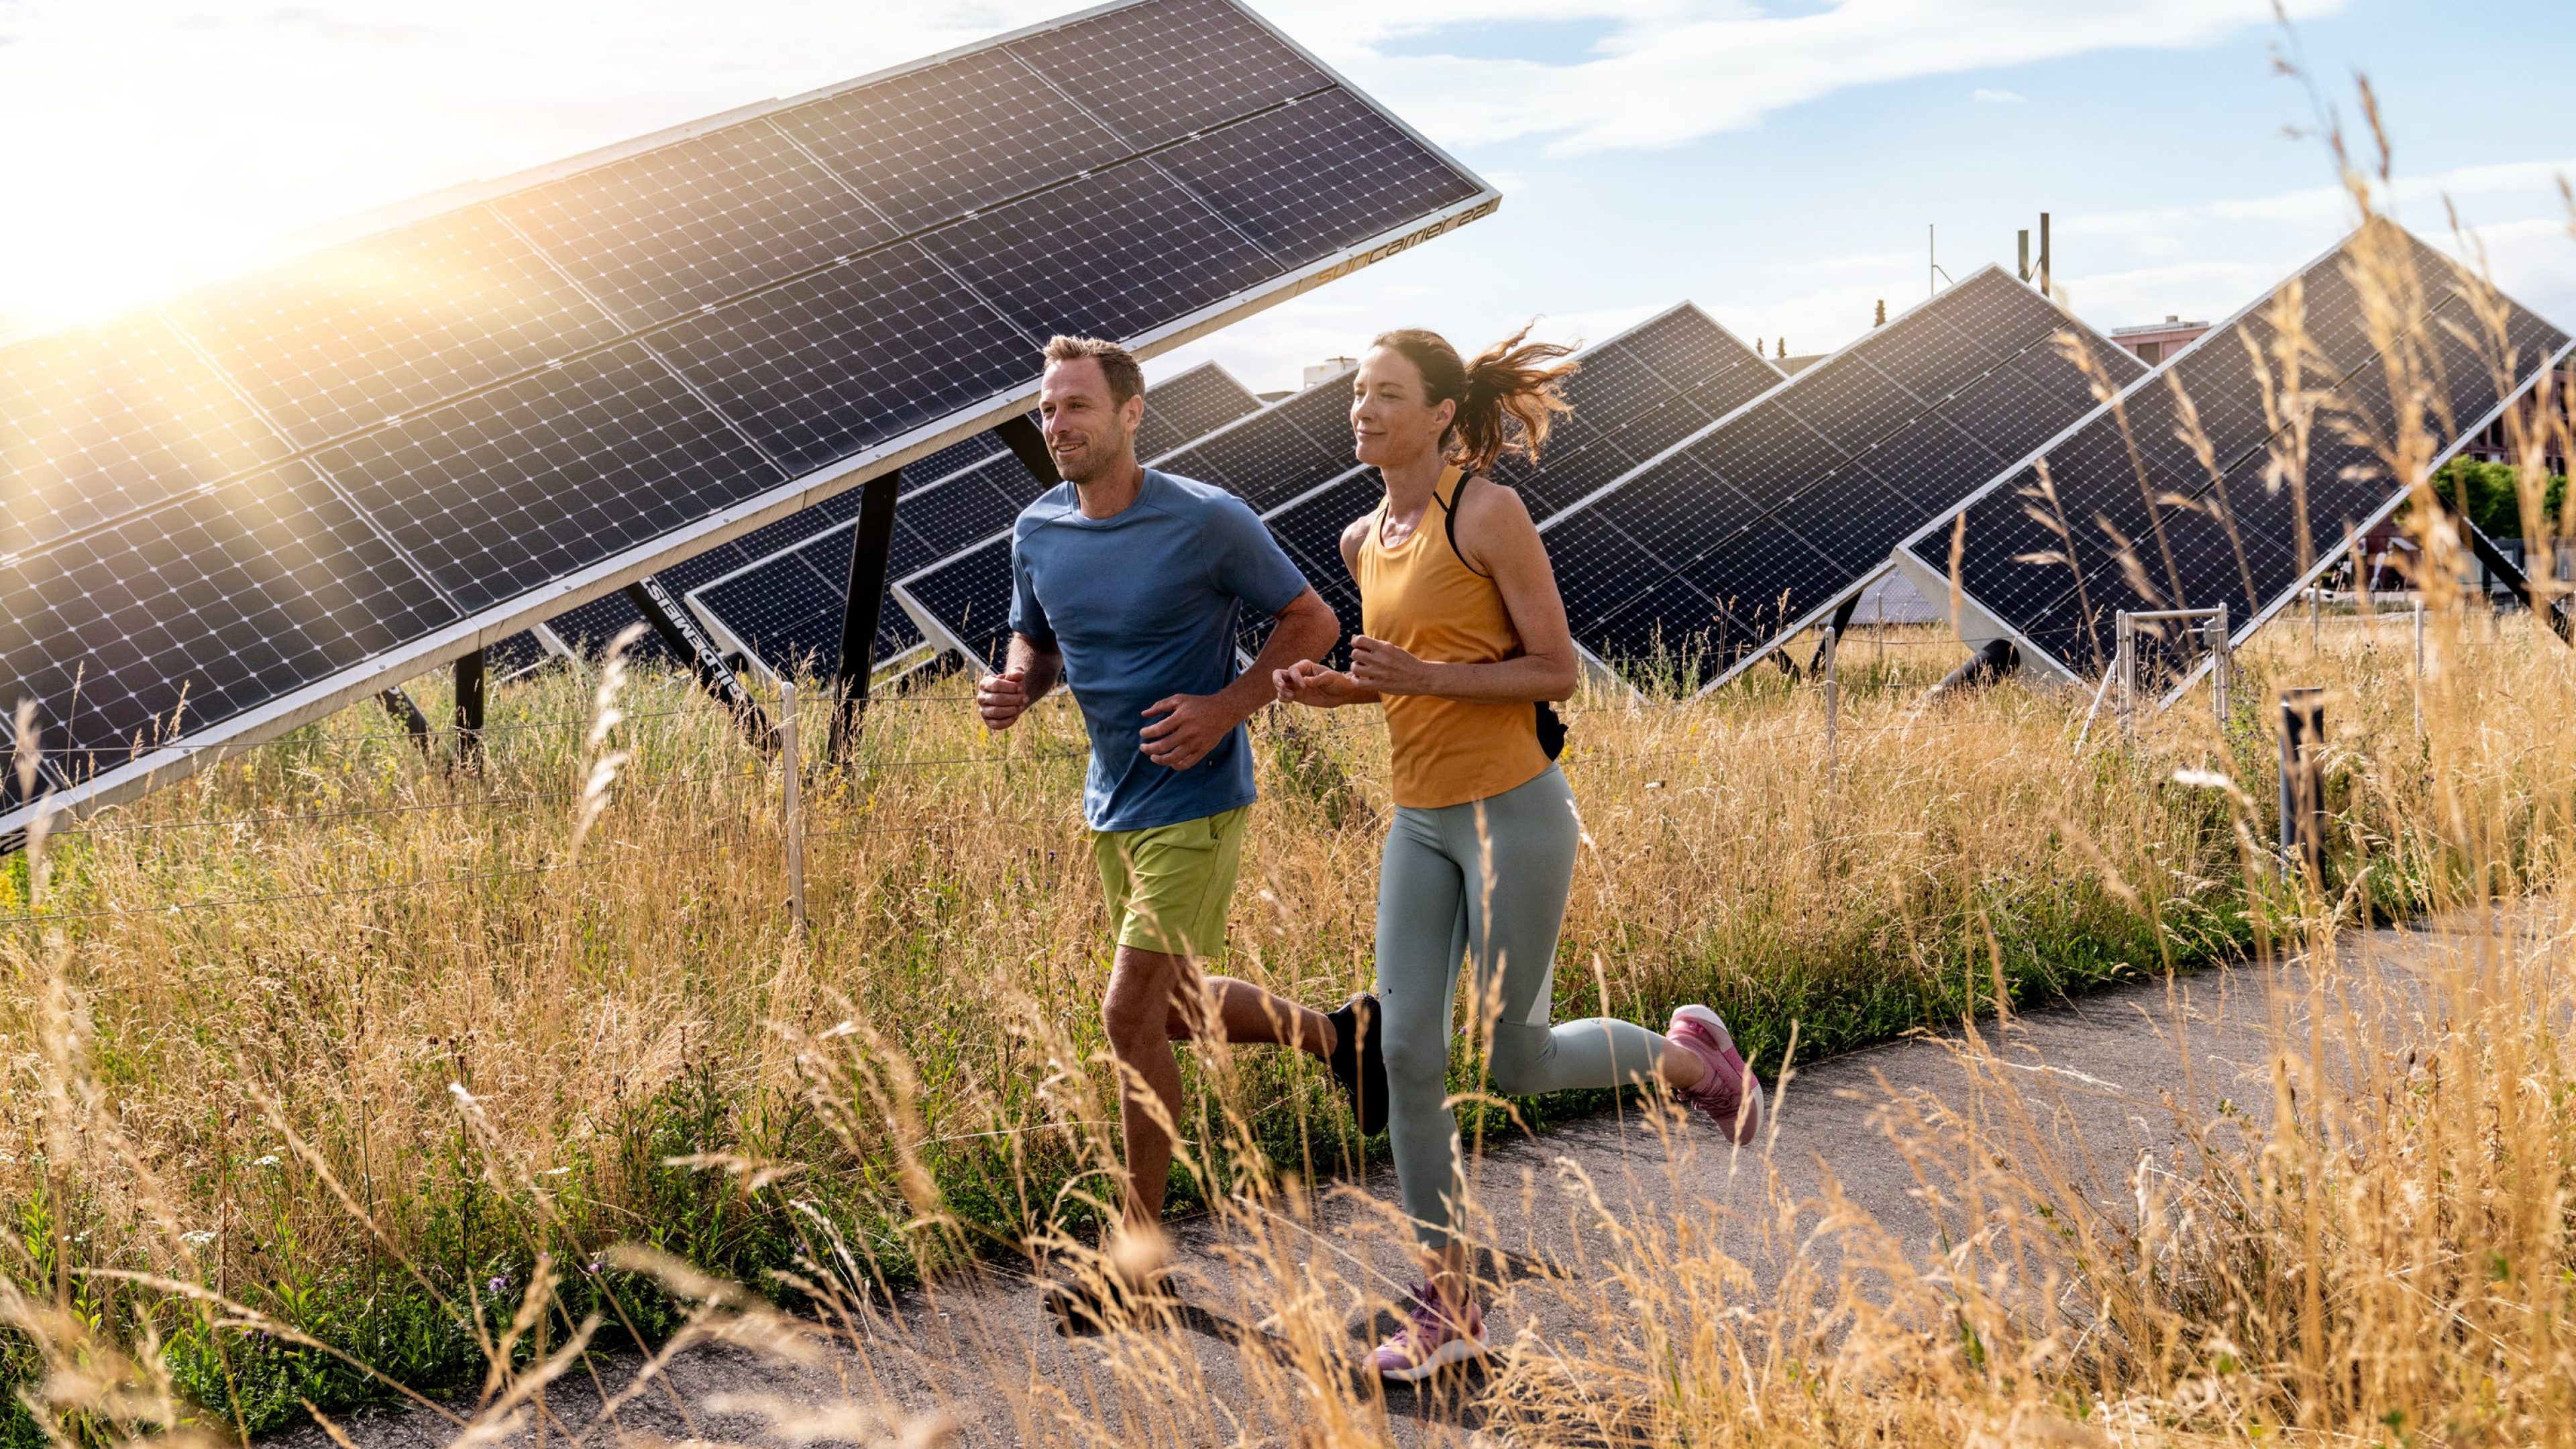 A couple jogging across a field with solar panels